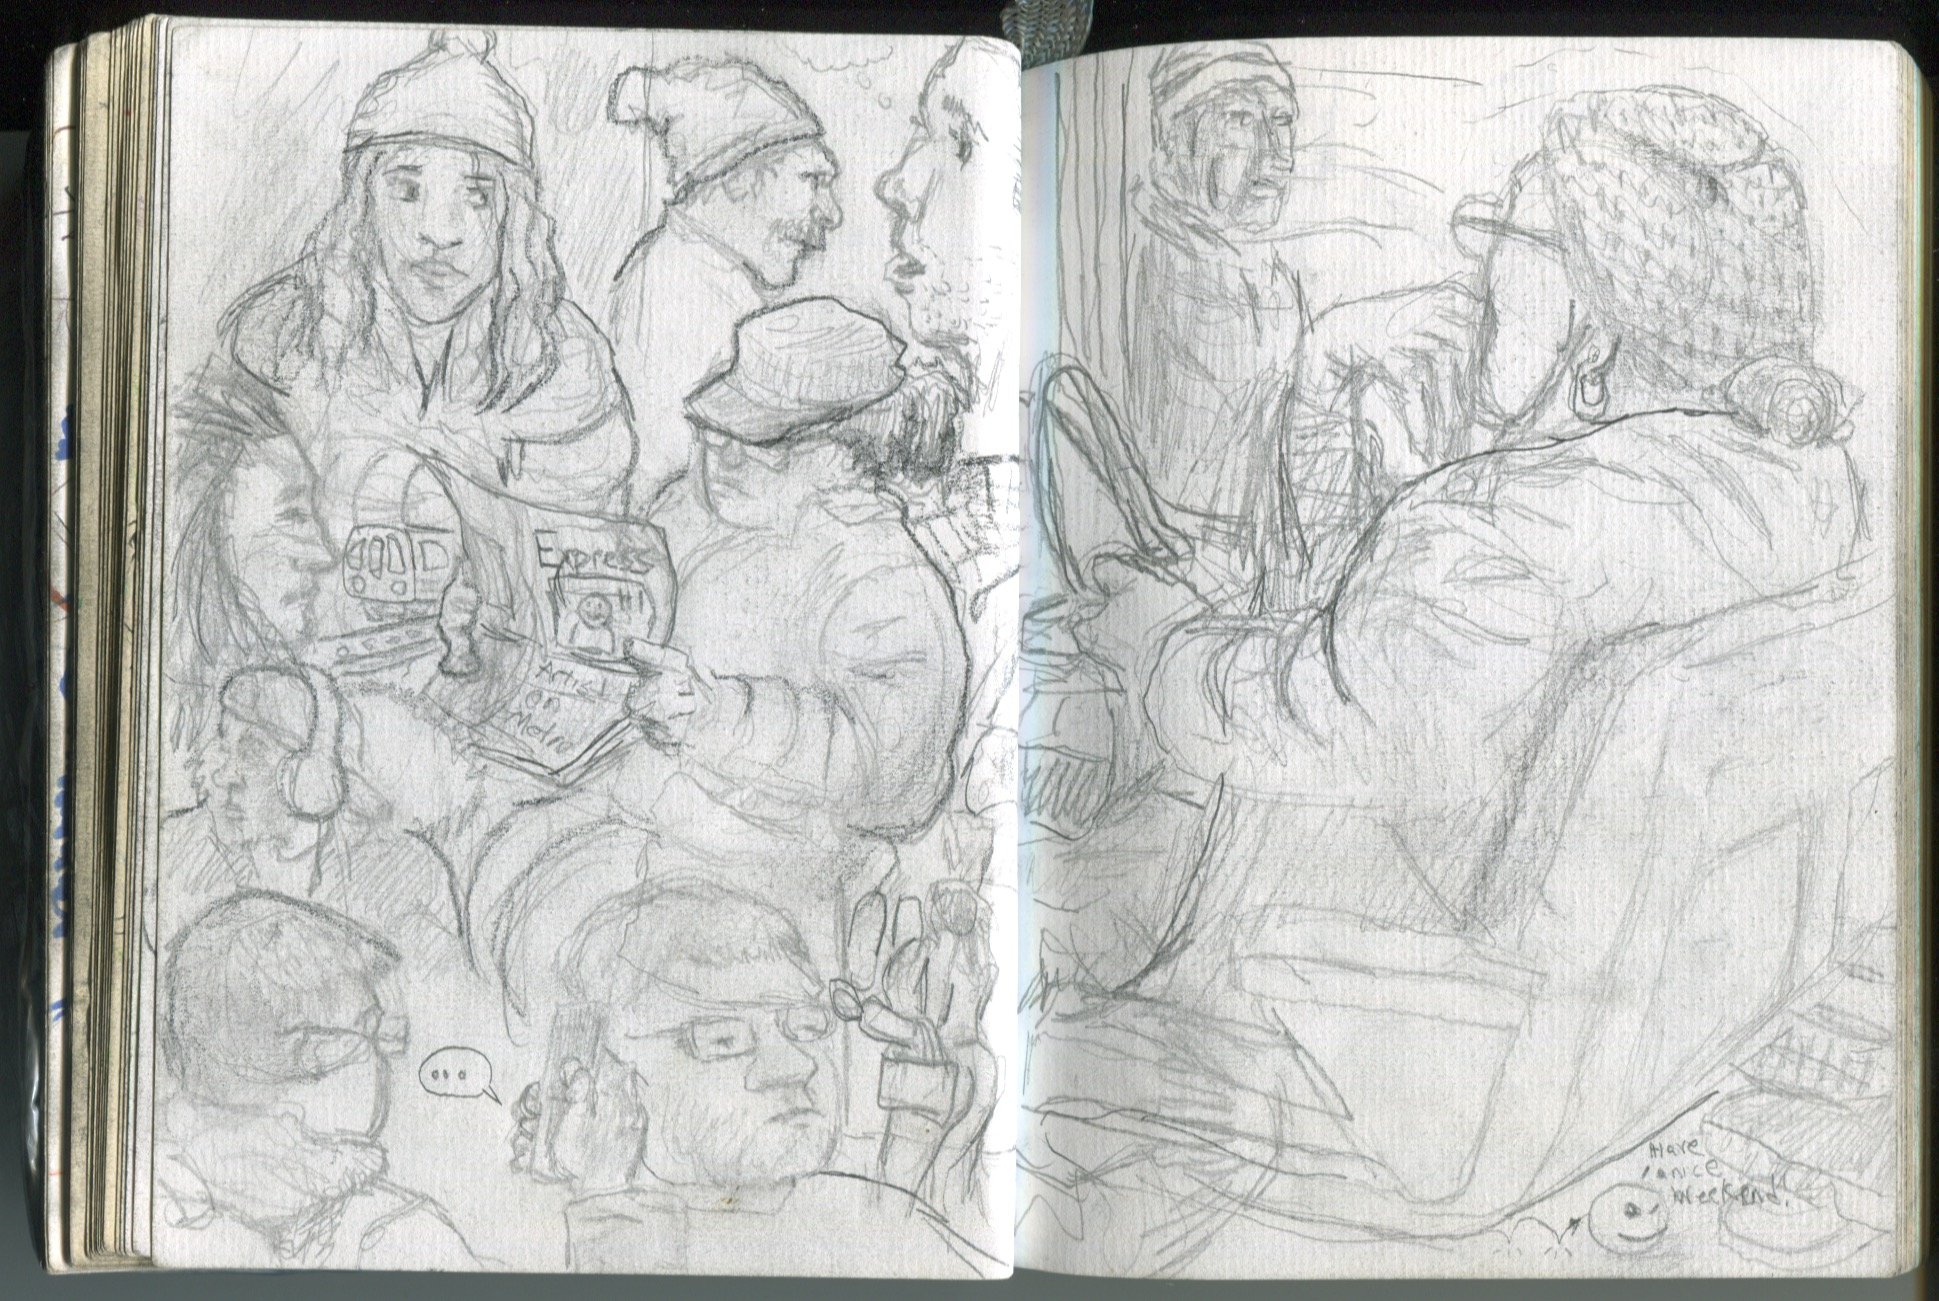  Early Pages from The Sketchbook, 